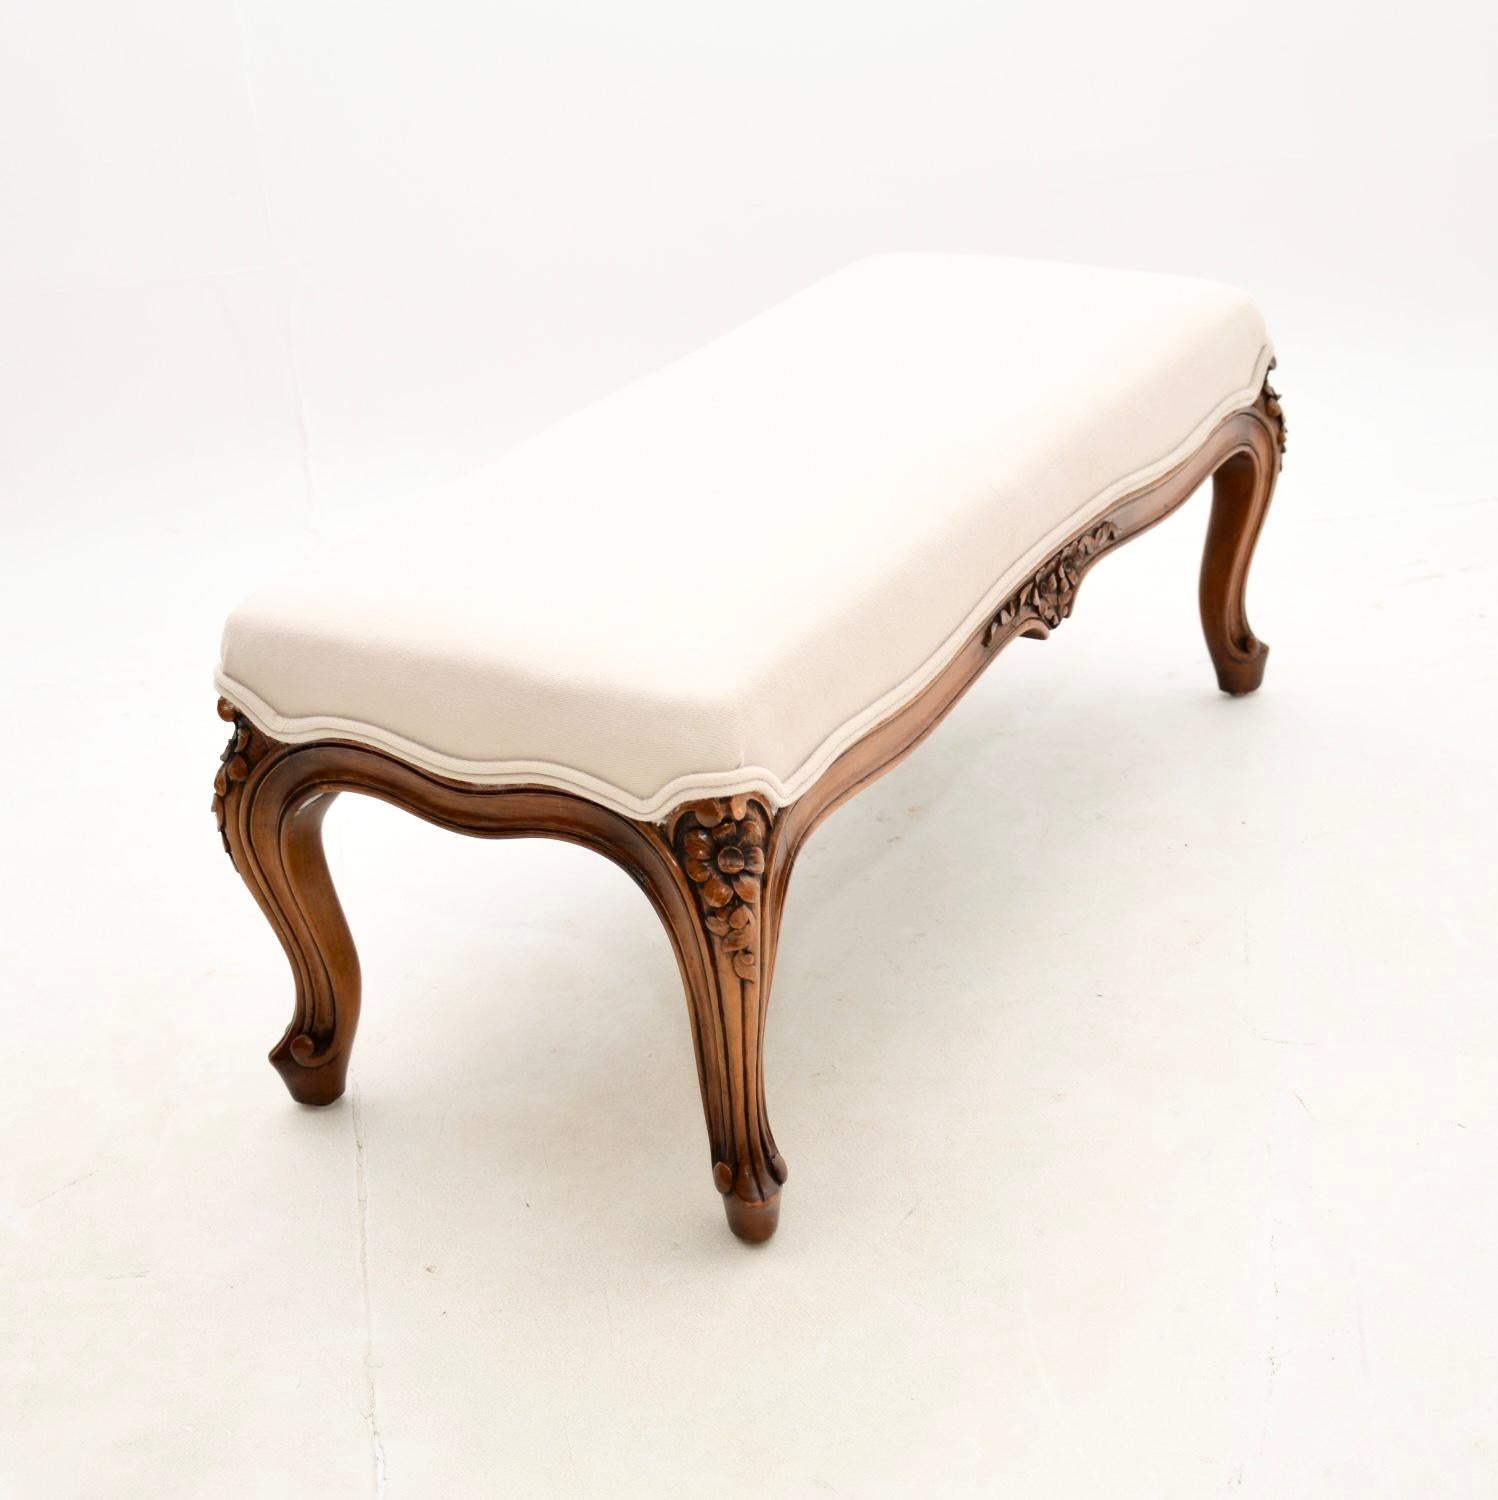 A beautiful antique French carved walnut foot stool. This was made in France, and it dates from around the 1930’s.

The quality is superb, the solid walnut frame has beautiful floral carving, with cabriole shaped legs and serpentine edges.

We have